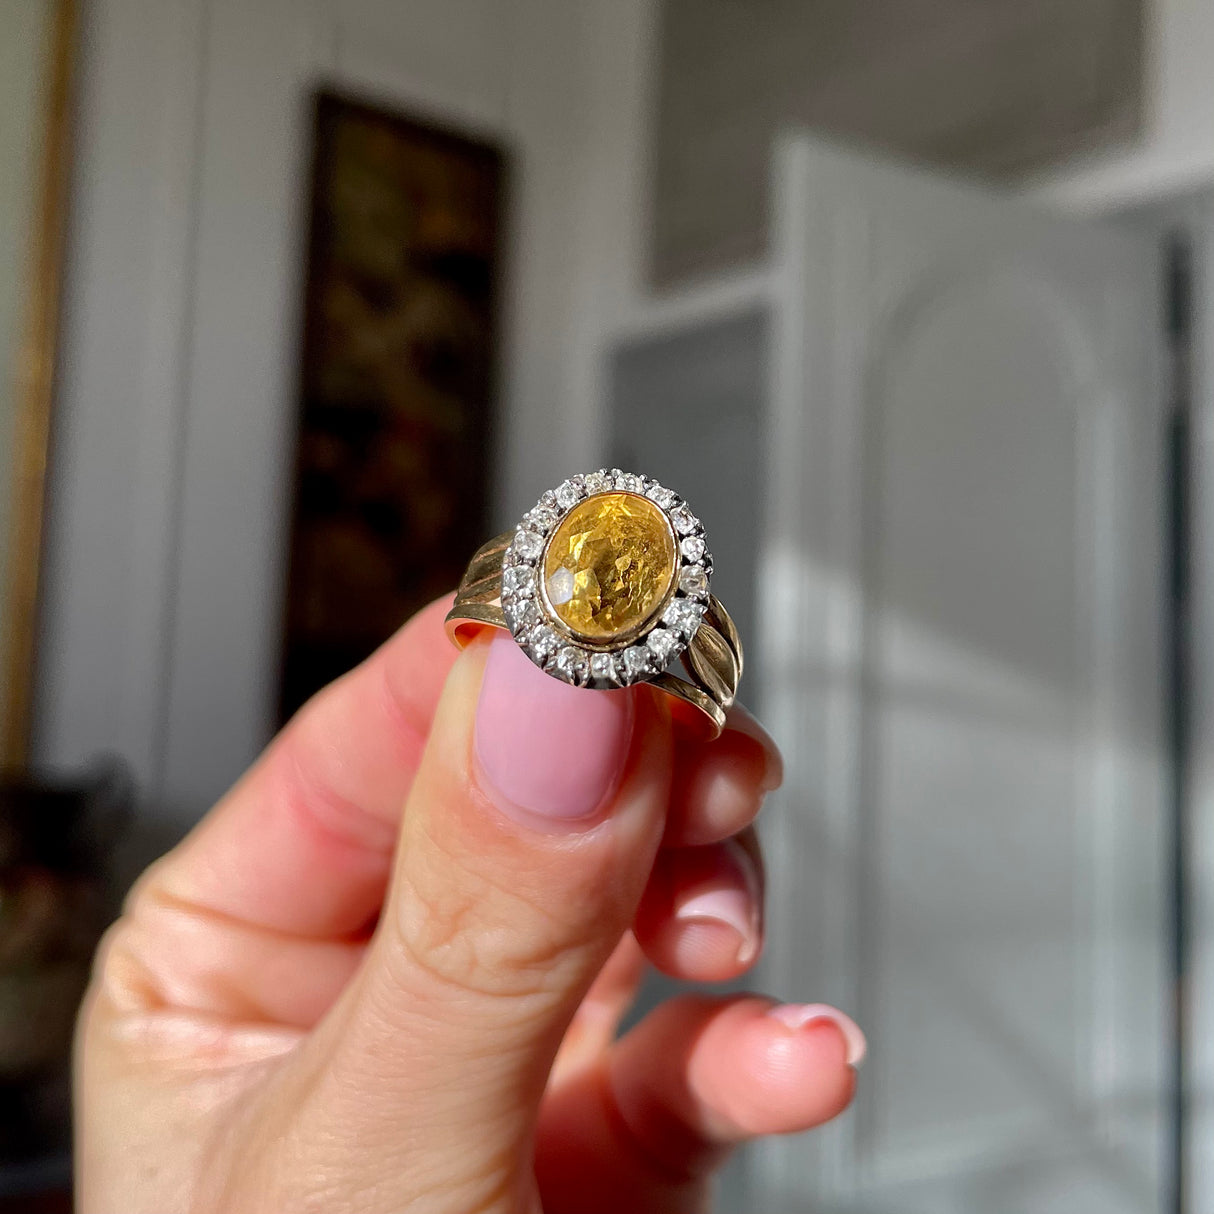 Antique Georgian citrine and diamond cluster ring, held in fingers.